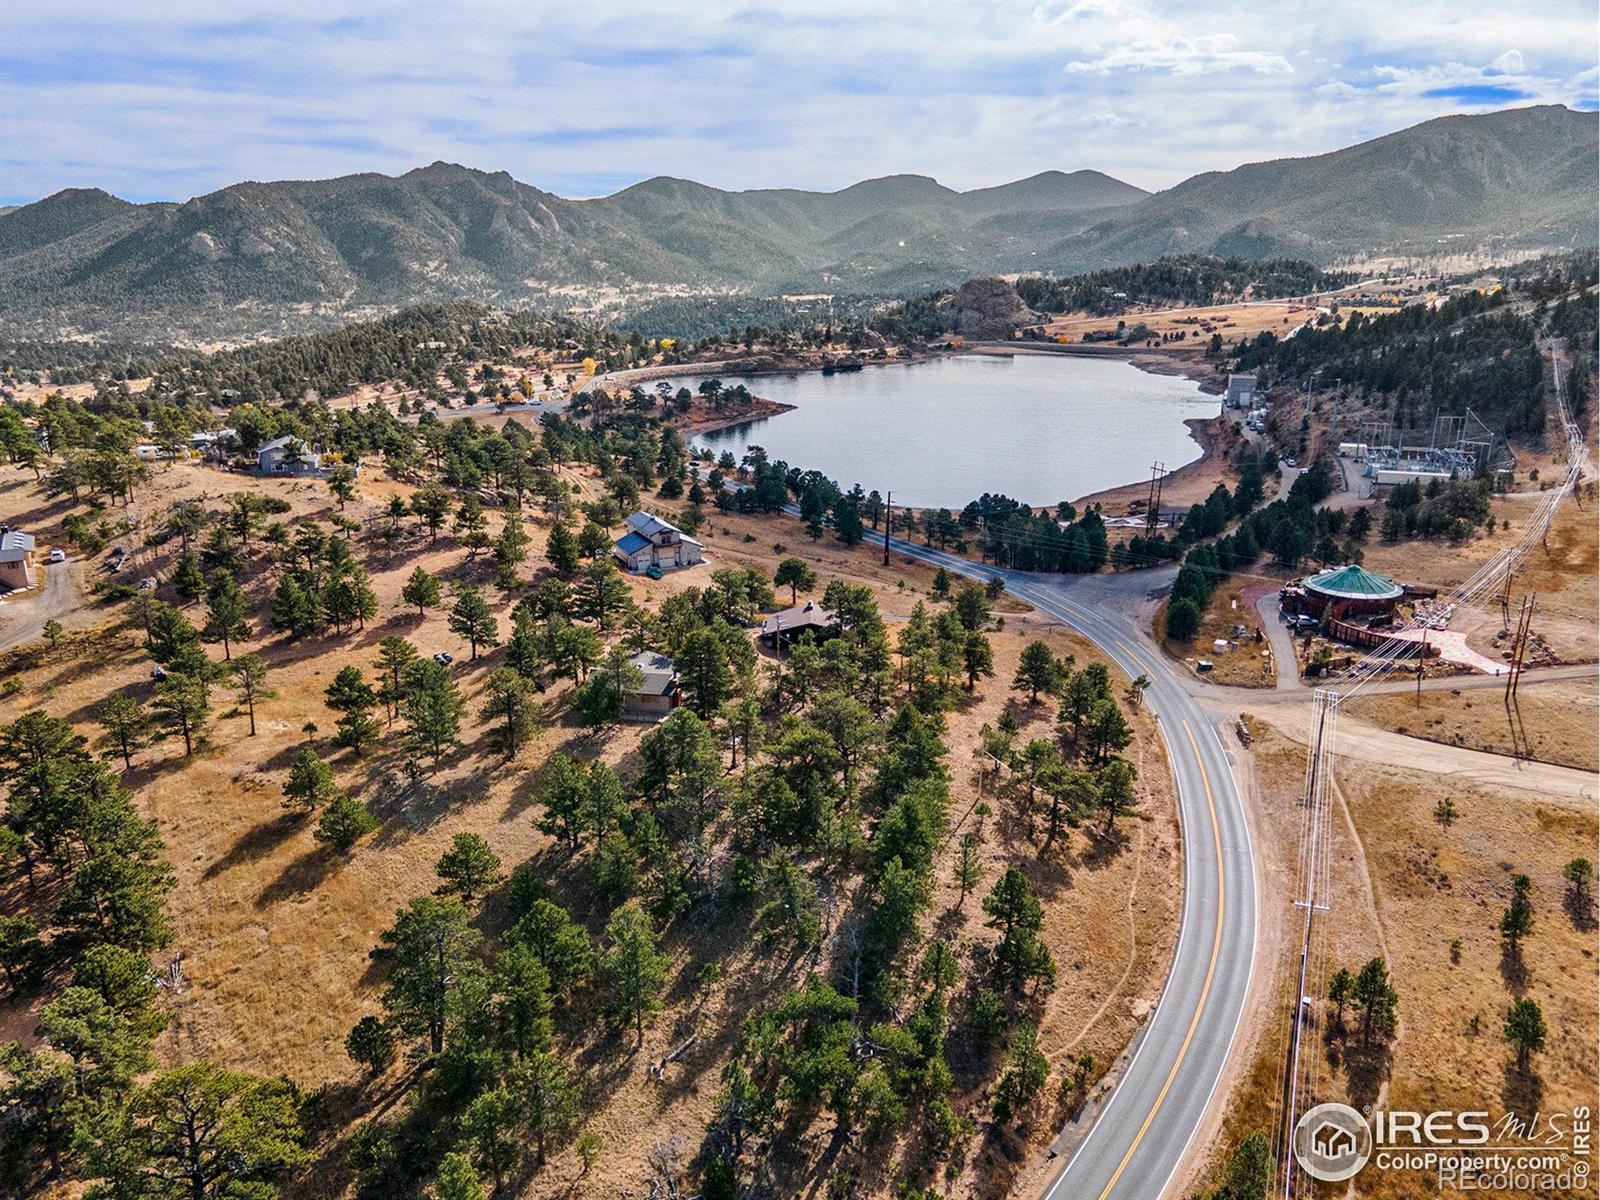 2090  marys lake road, Estes Park sold home. Closed on 2024-04-25 for $675,000.